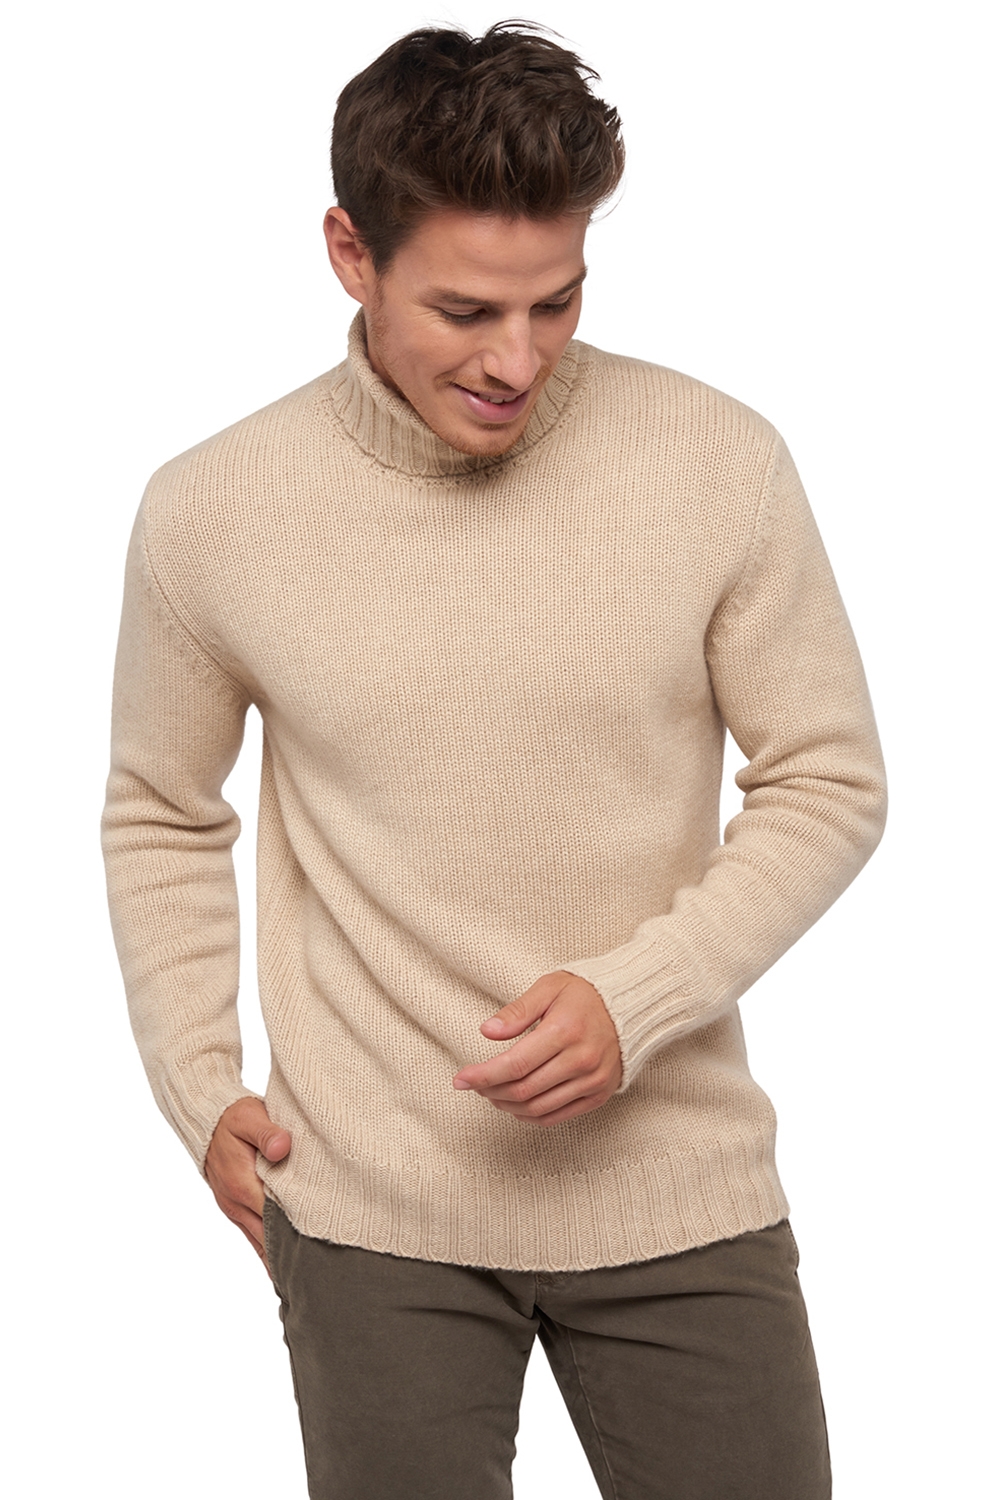 Cachemire pull homme col roule achille natural beige 2xl